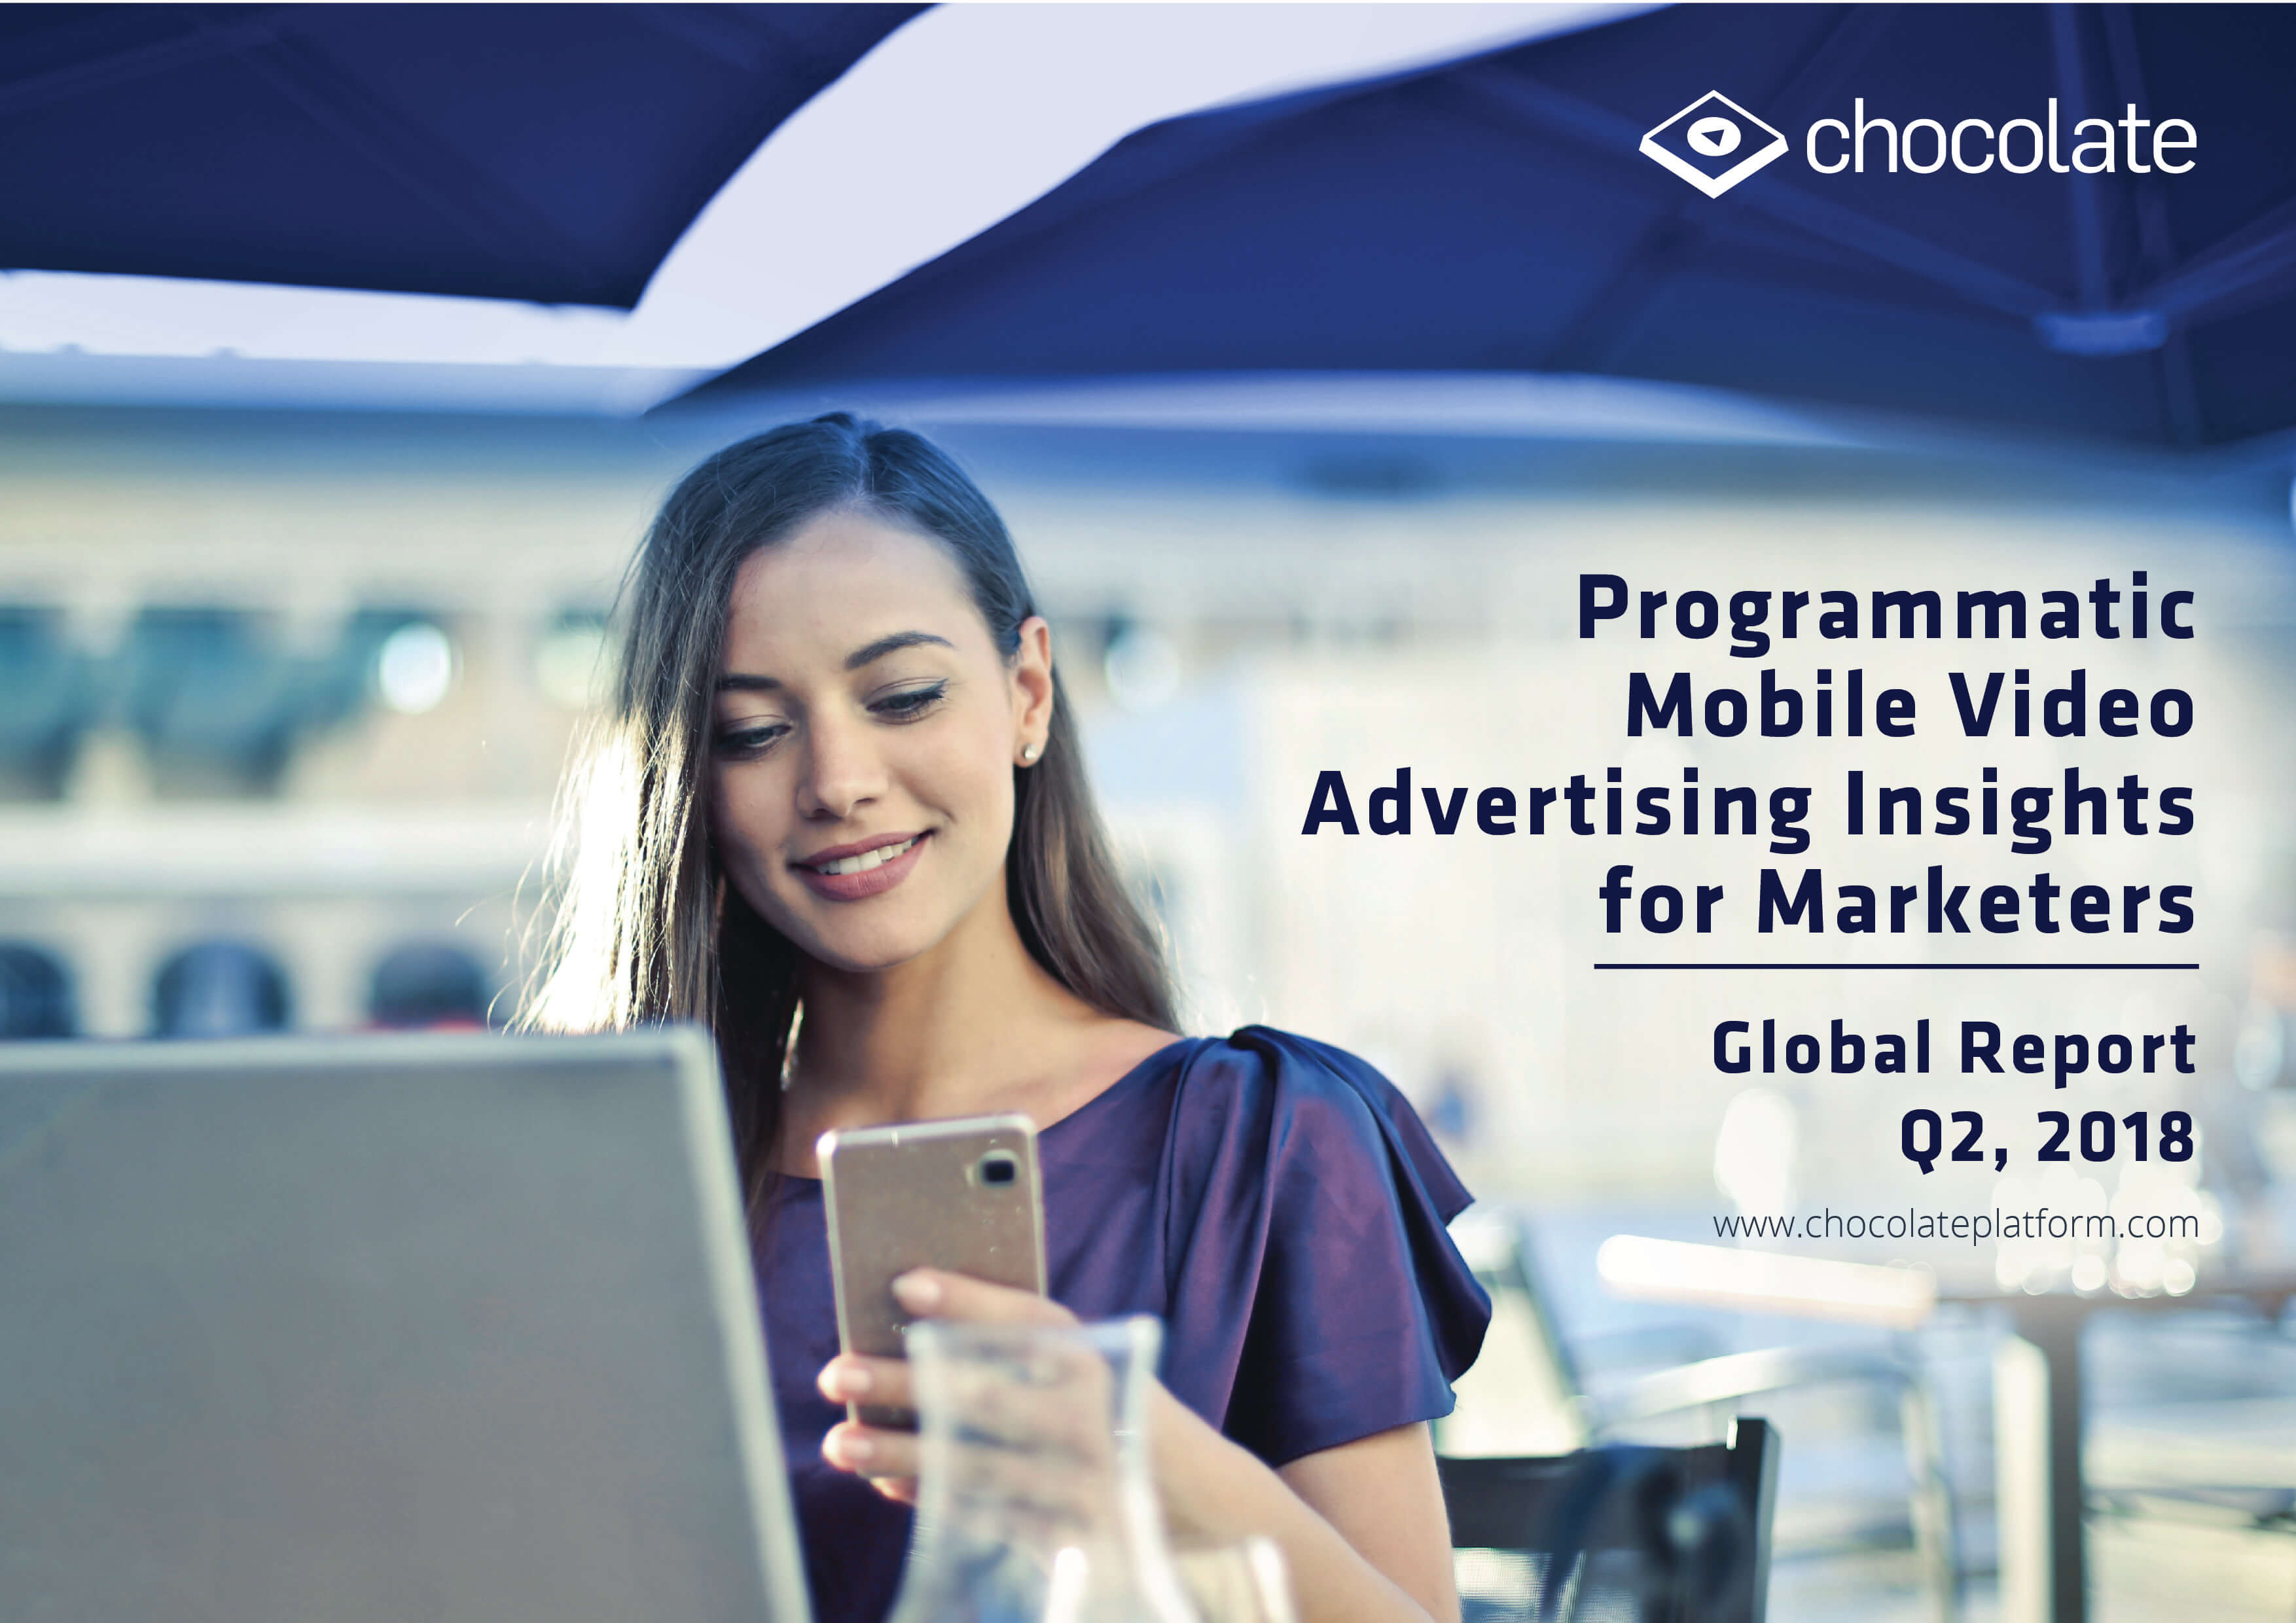 Programmatic Mobile Video Advertising Insights for Marketers